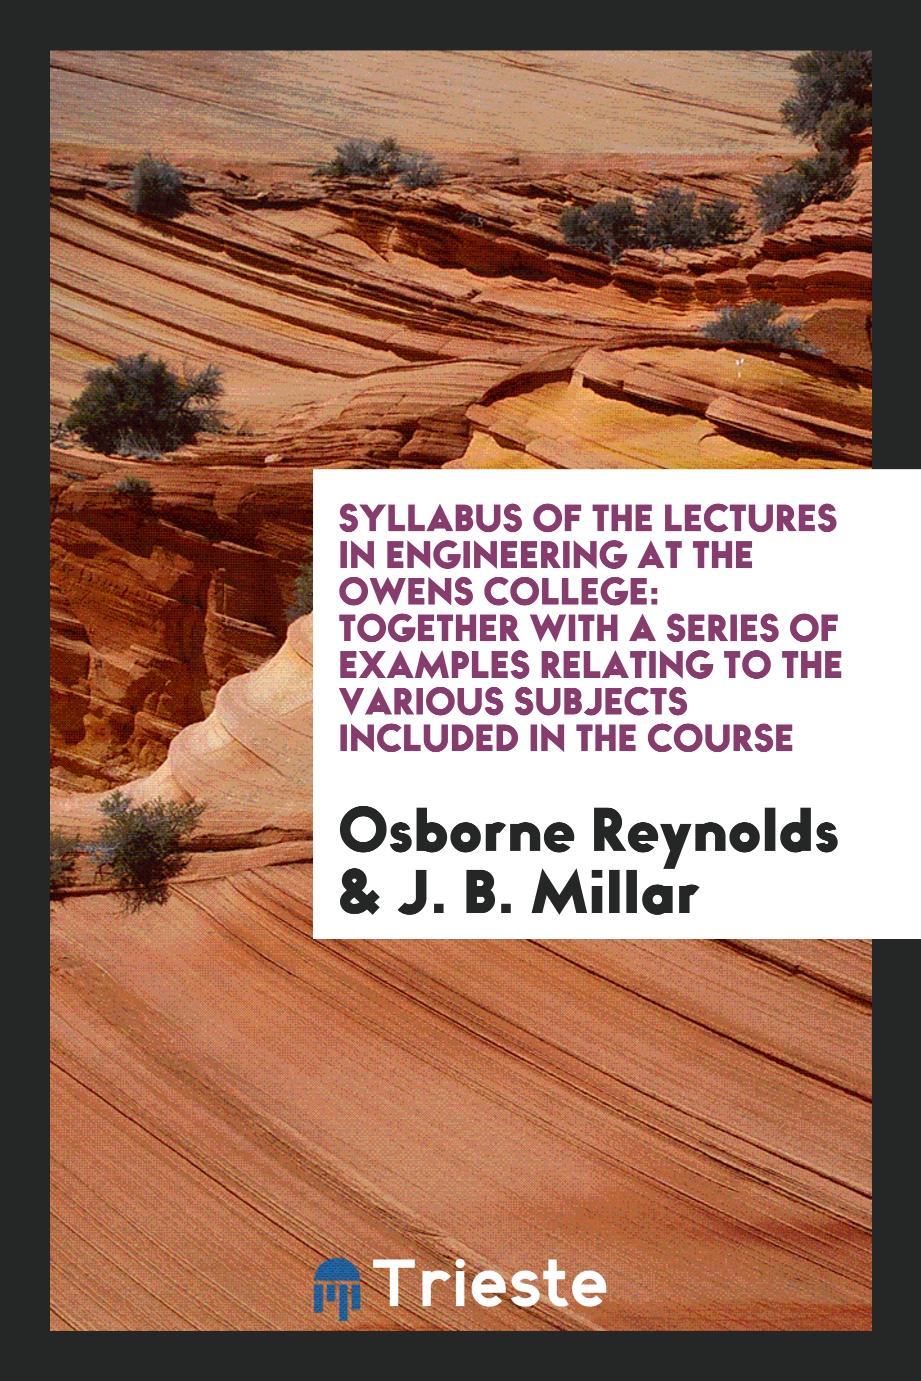 Syllabus of the Lectures in Engineering at the Owens College: Together with a Series of Examples Relating to the Various Subjects Included in the Course